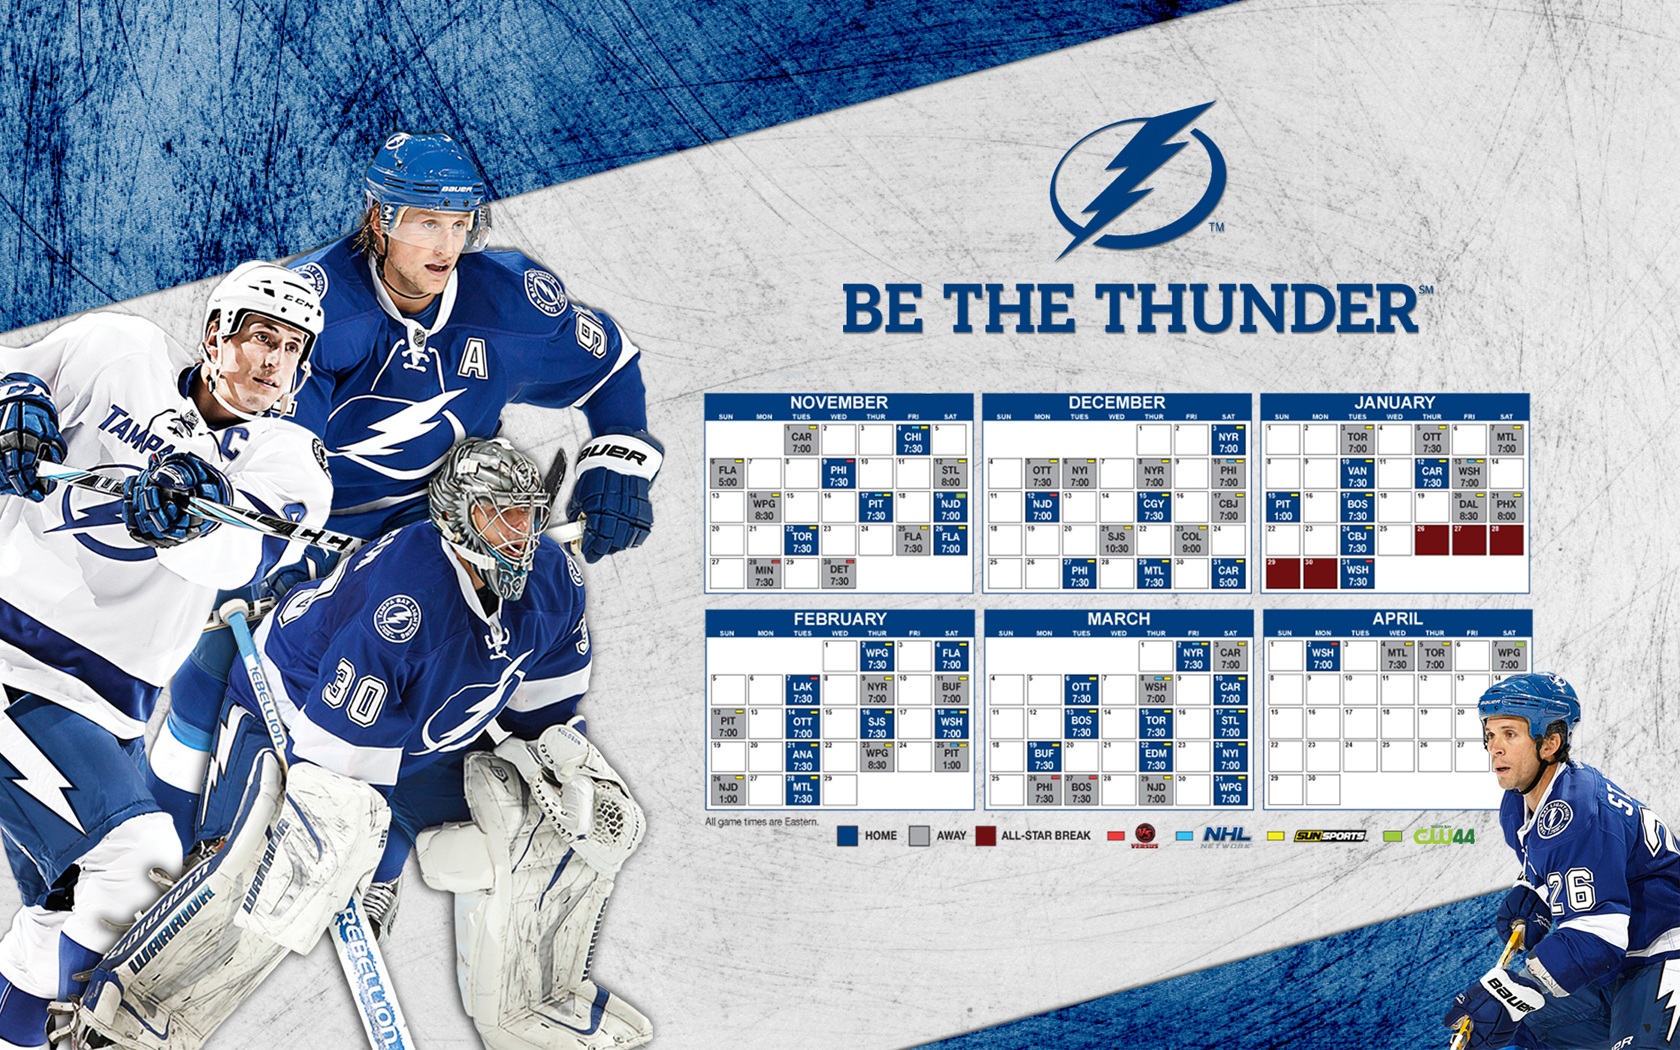 Tampa Bay Lightning images TBL 2011 12 Schedule HD wallpaper and 1680x1050